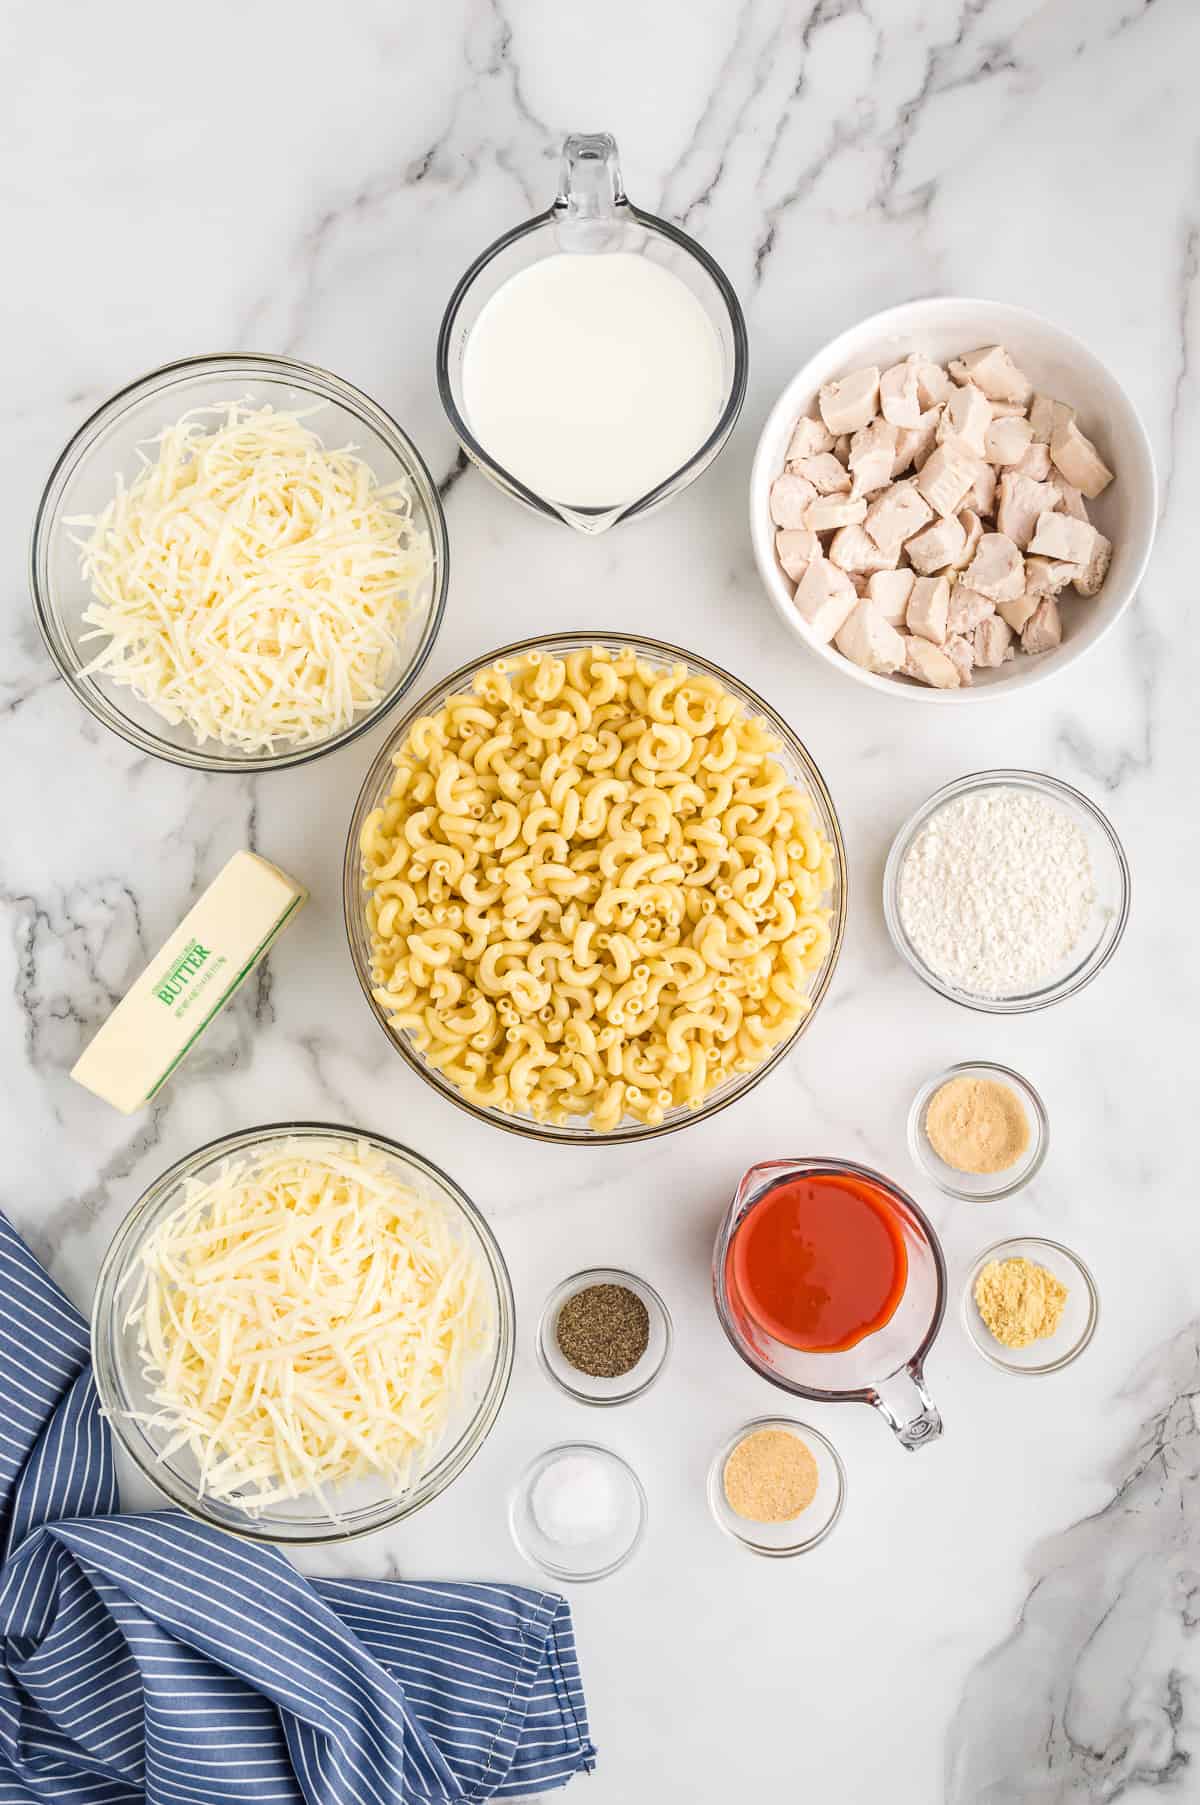 Ingredients on marble countertop: bowl of shredded cheese, measuring cup of milk, bowl of cubed cooked chicken, bowl of flour, measuring cup of buffalo sauce, 4 small bowls of spices and seasonings, a second bowl of shredded cheese, one stick of butter, and bowl of elbow macaroni.